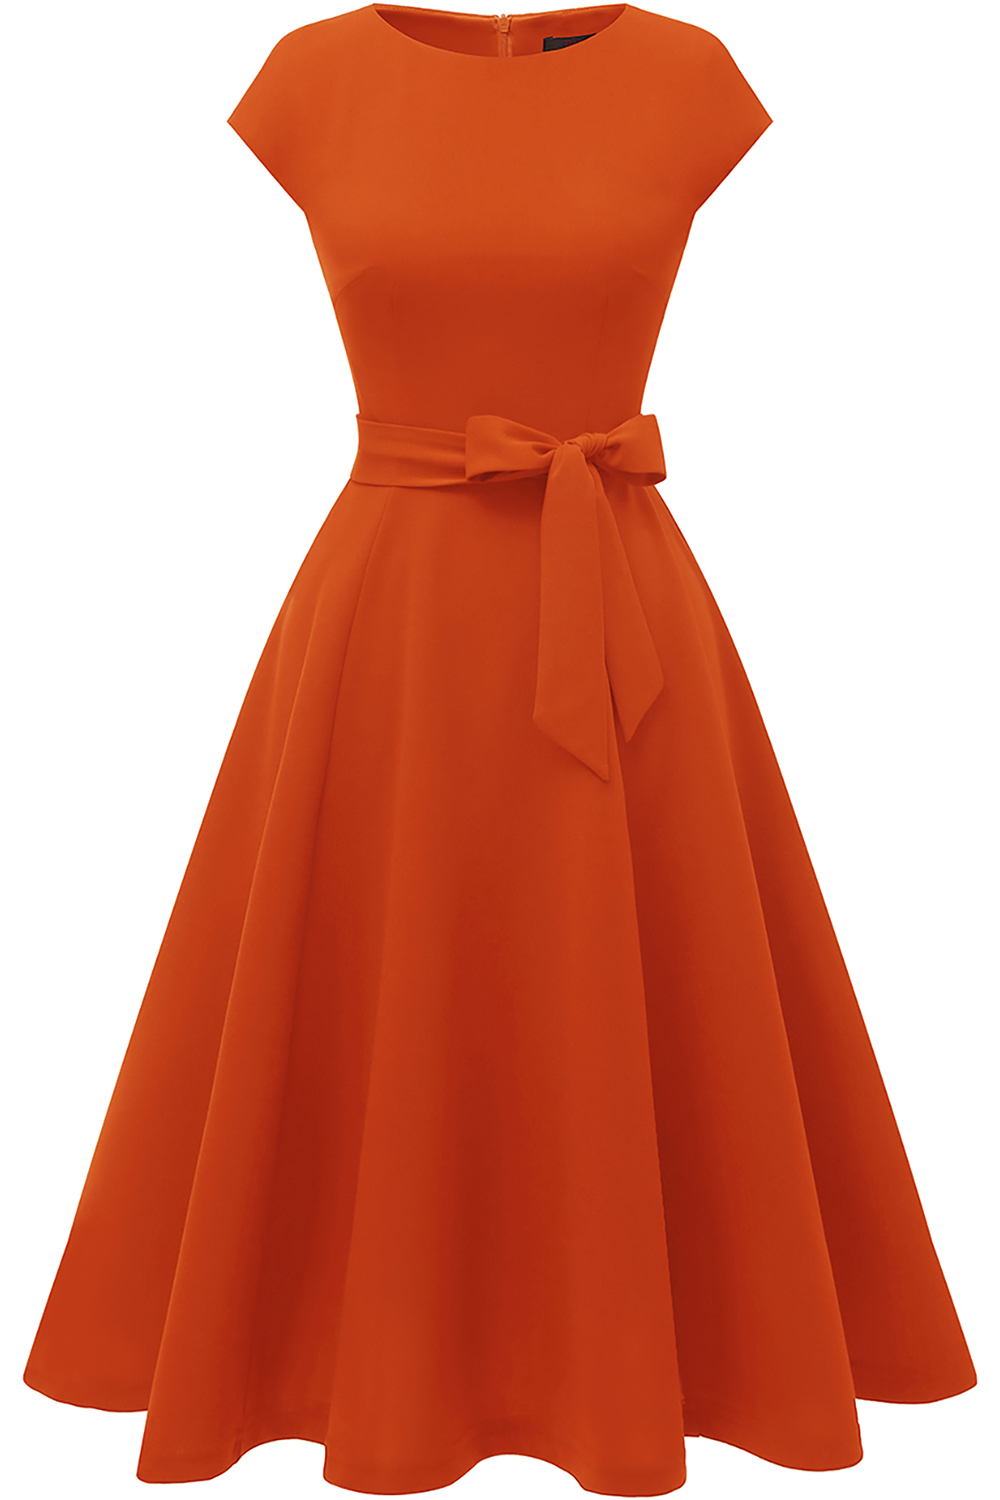 A-Line Knee-Length Orange Cocktail Dress with Cap Sleeves, Vintage Style, Unique and Elegant